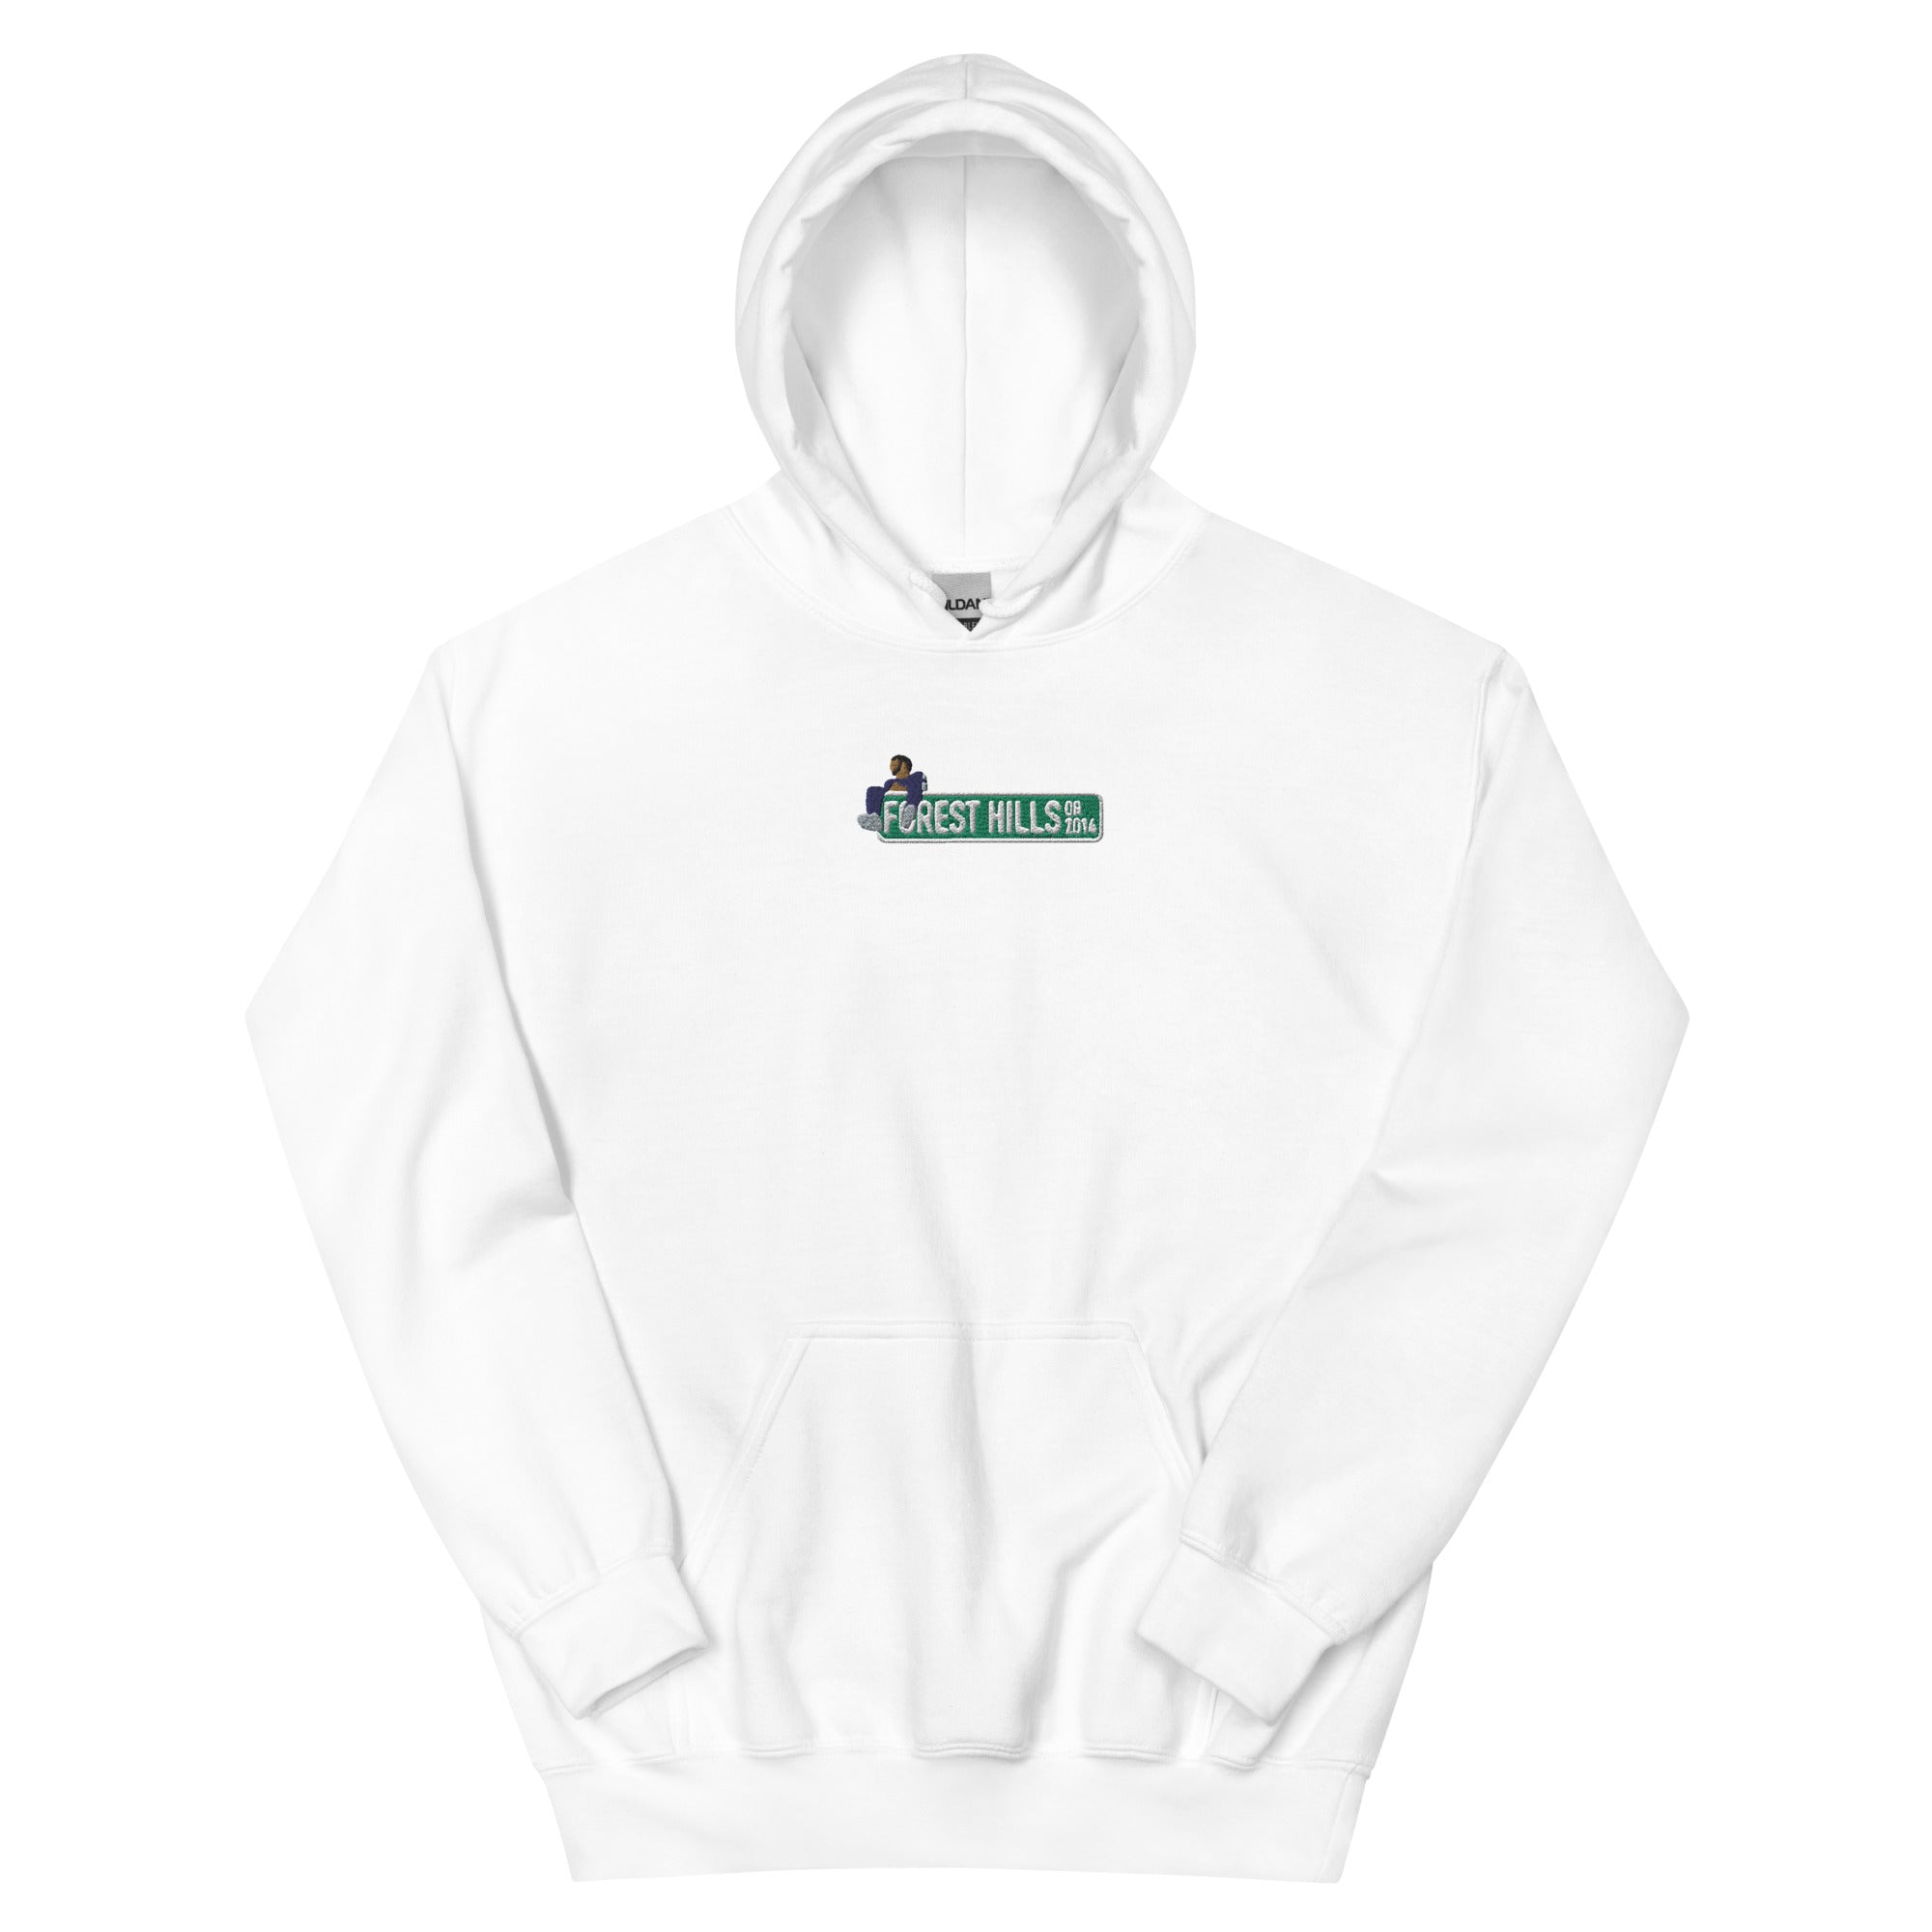 OUR HOODIES